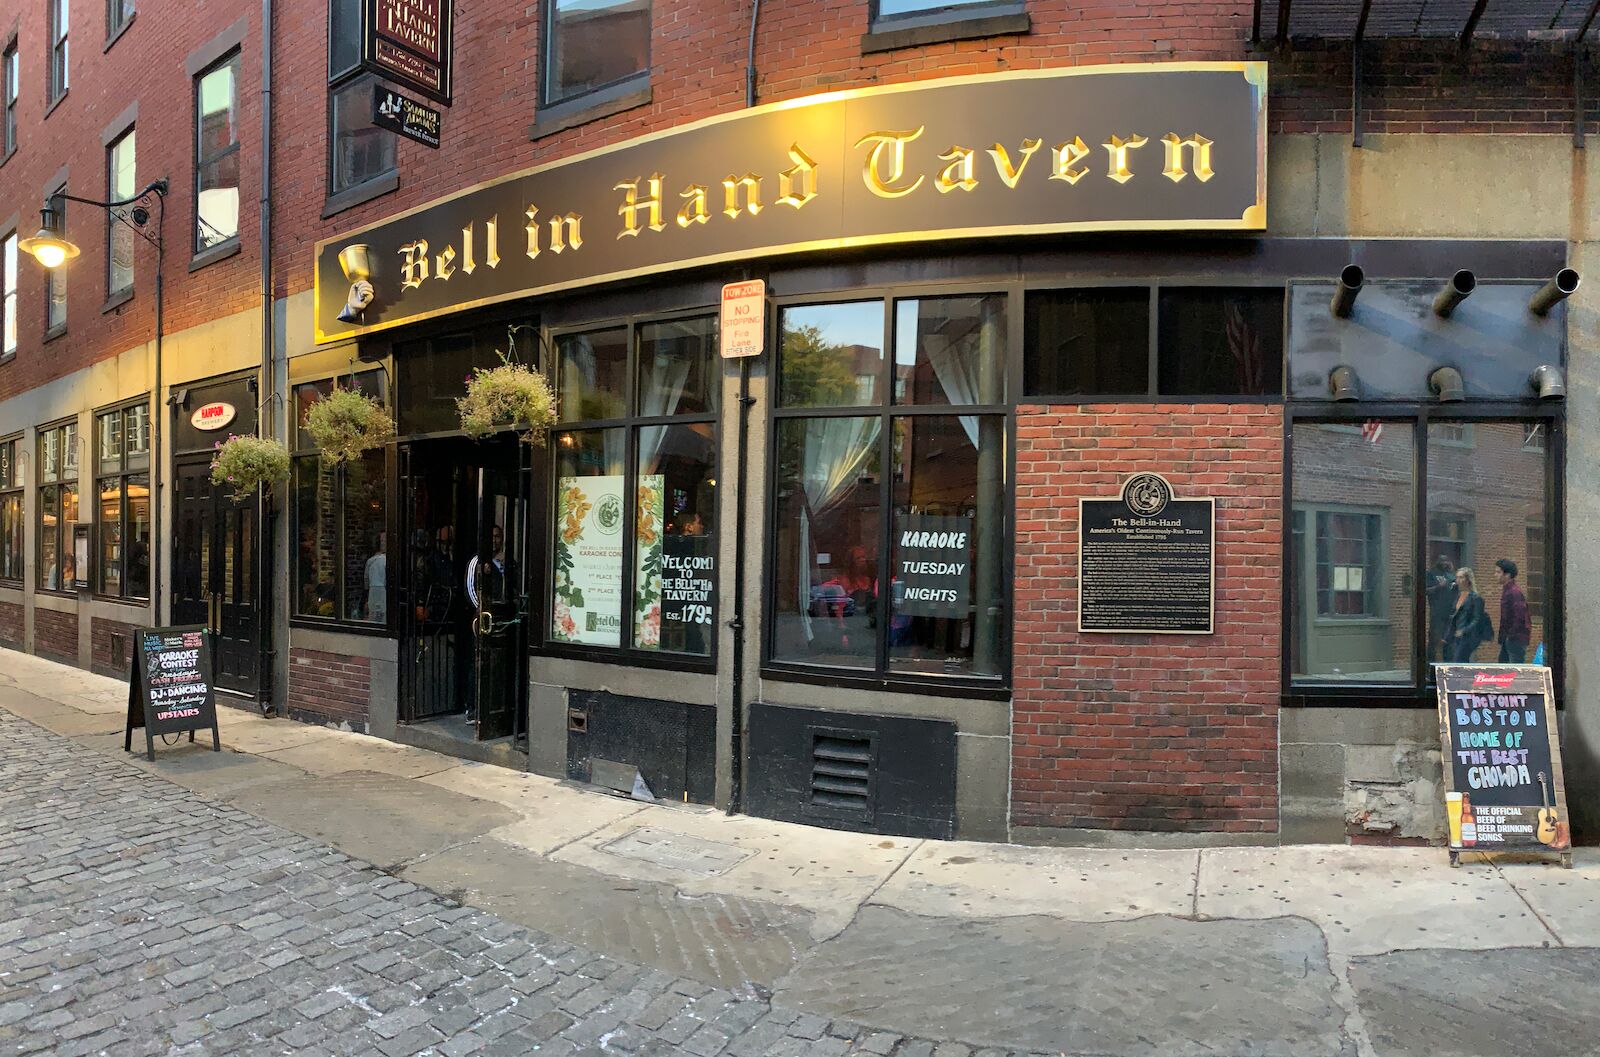 Facade of the bar the Bell in Hand in Boston's Little Italy